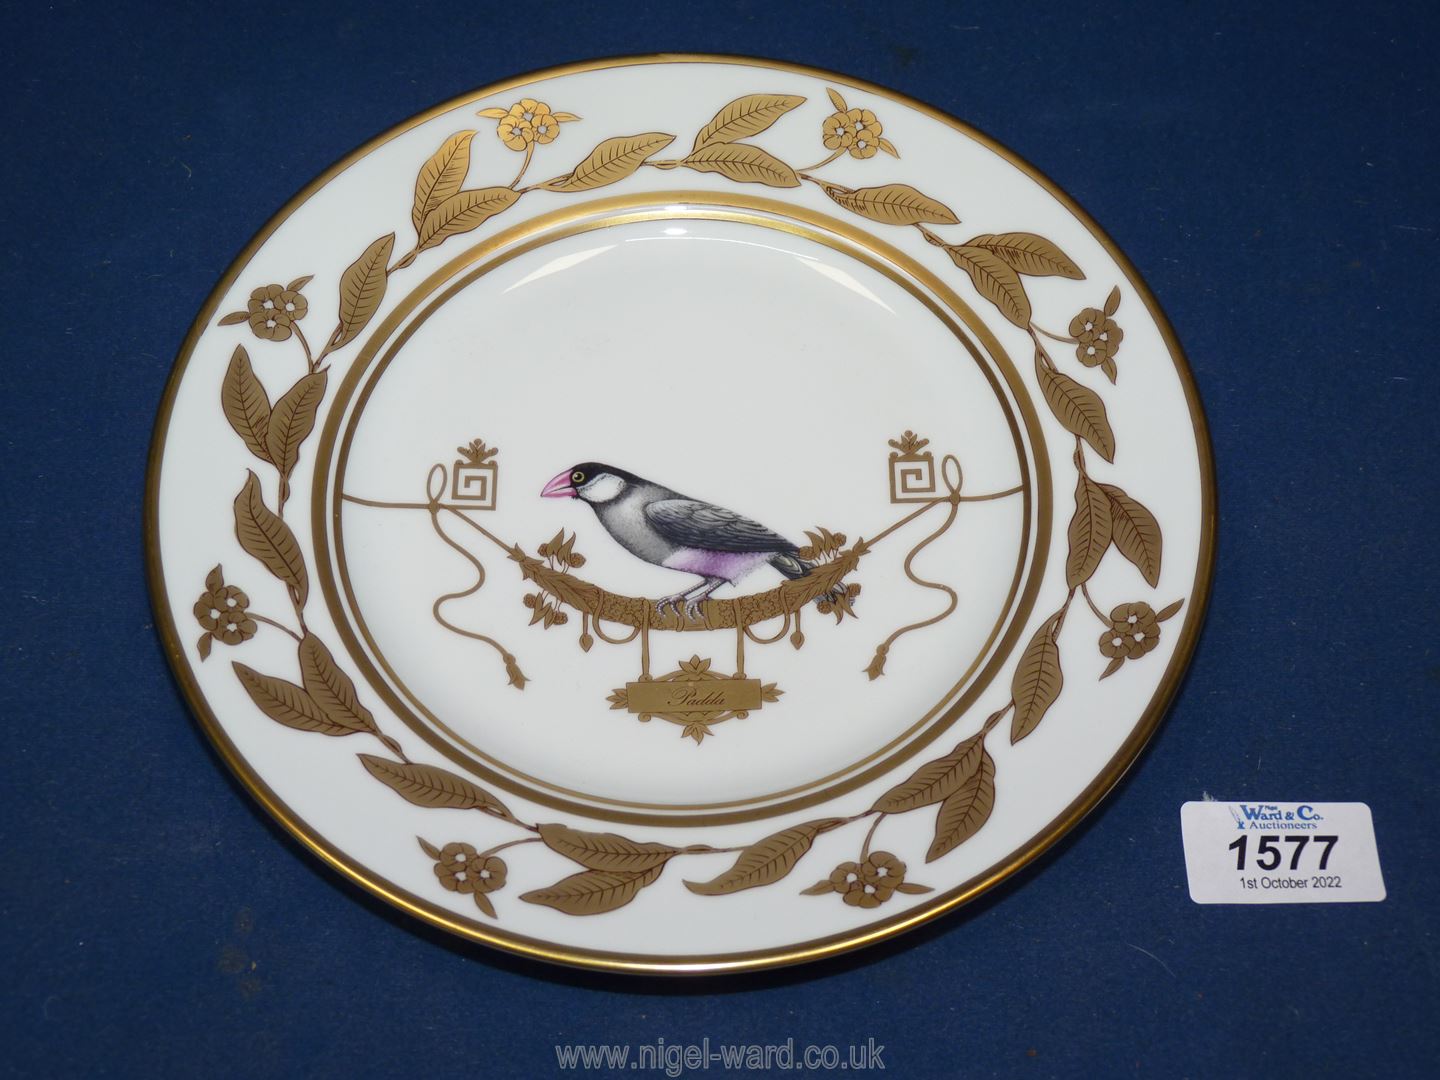 A rare porcelain Plate featuring a Finch by Richard Ginori from the bird series, 8 1/2'' diameter.